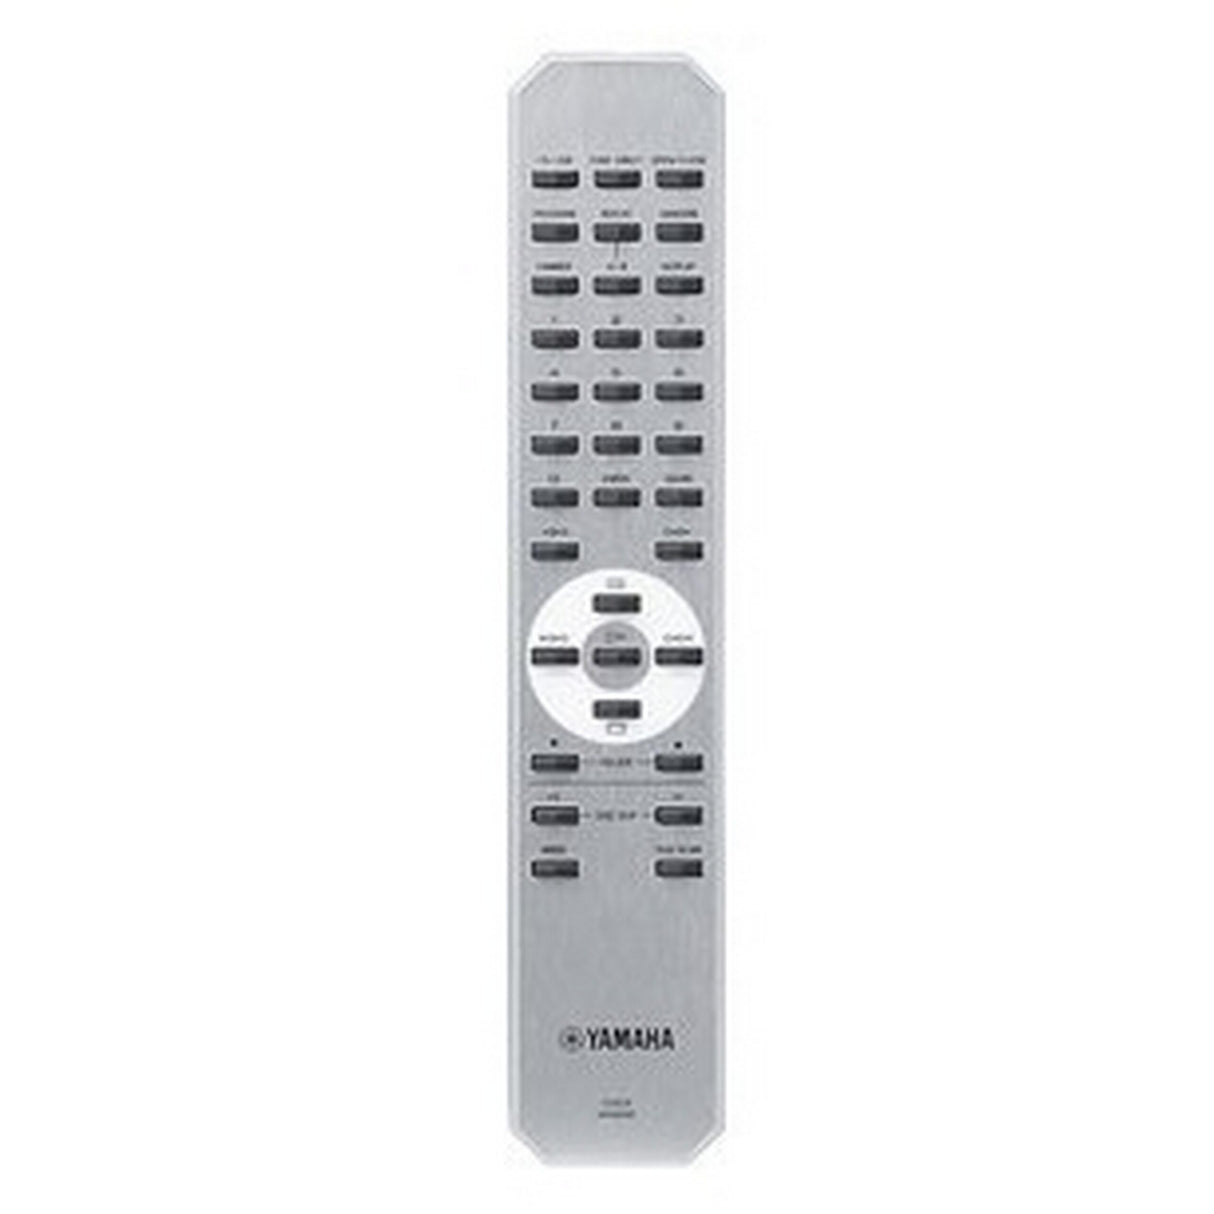 Yamaha WR960800 Remote Control for CD-S300 CD Player